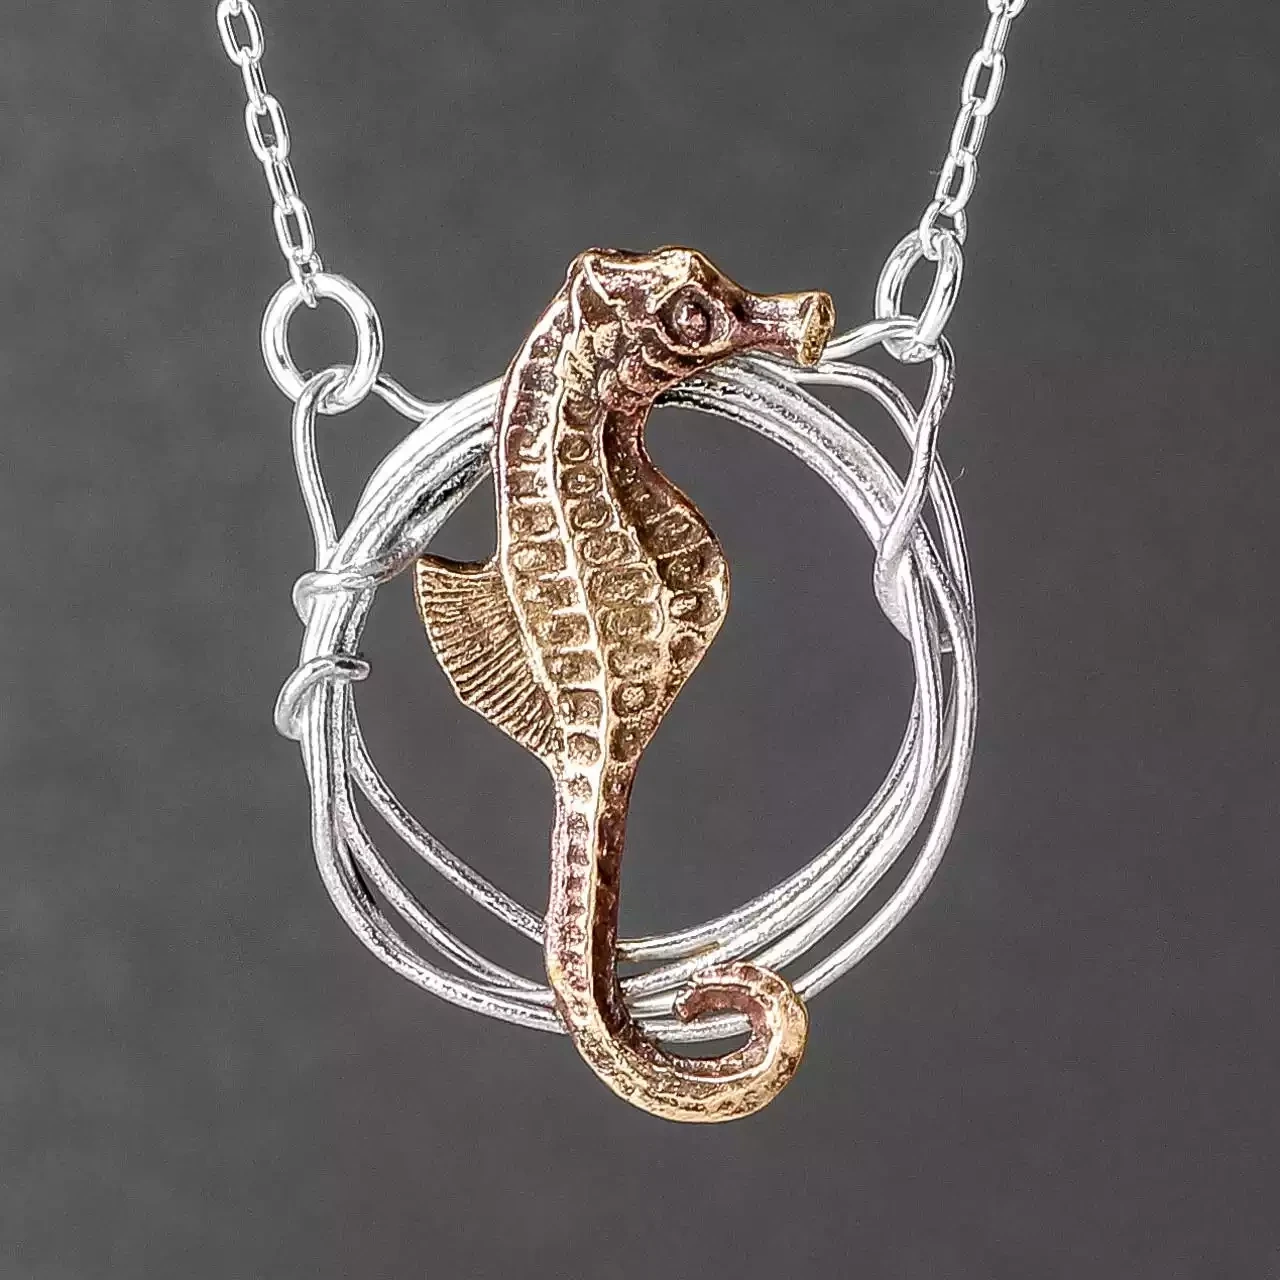 Seahorse Silver and Bronze Necklace by Xuella Arnold